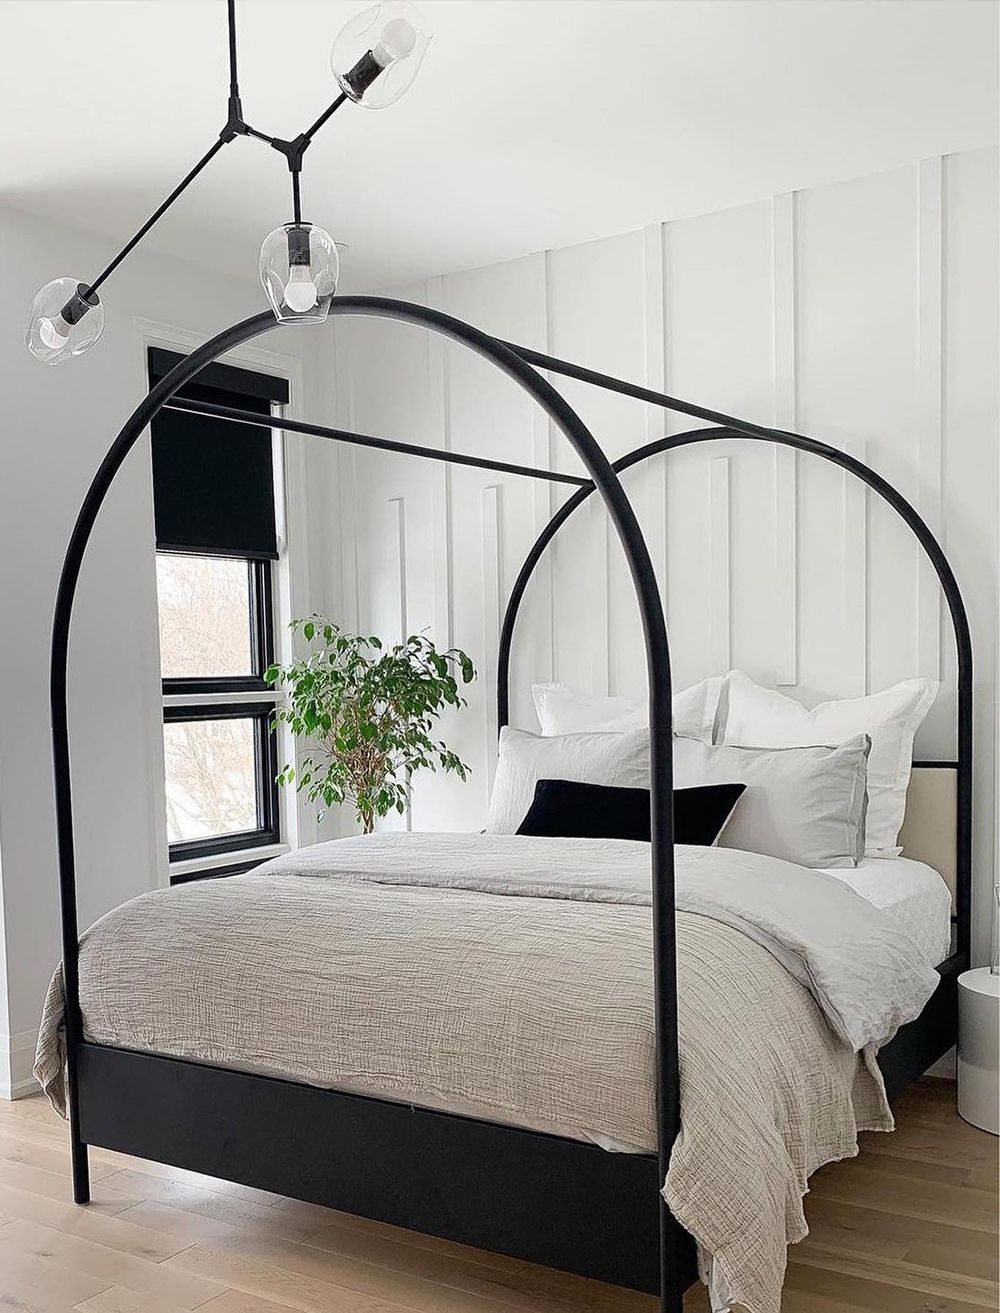 Buying a Canopy Bed @thehouseacrossthestreet